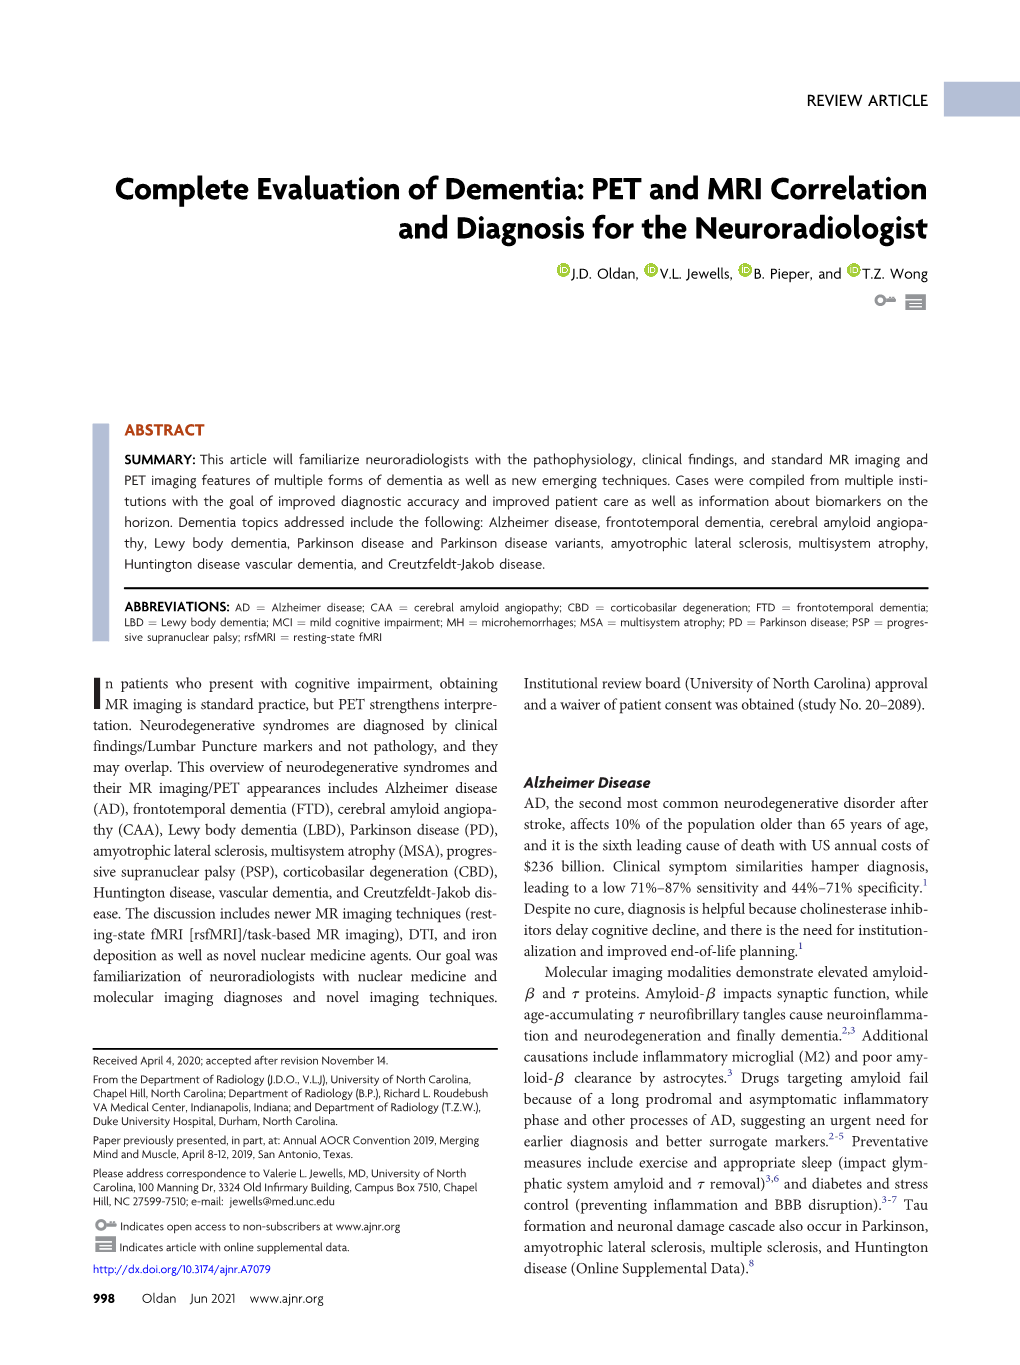 PET and MRI Correlation and Diagnosis for the Neuroradiologist